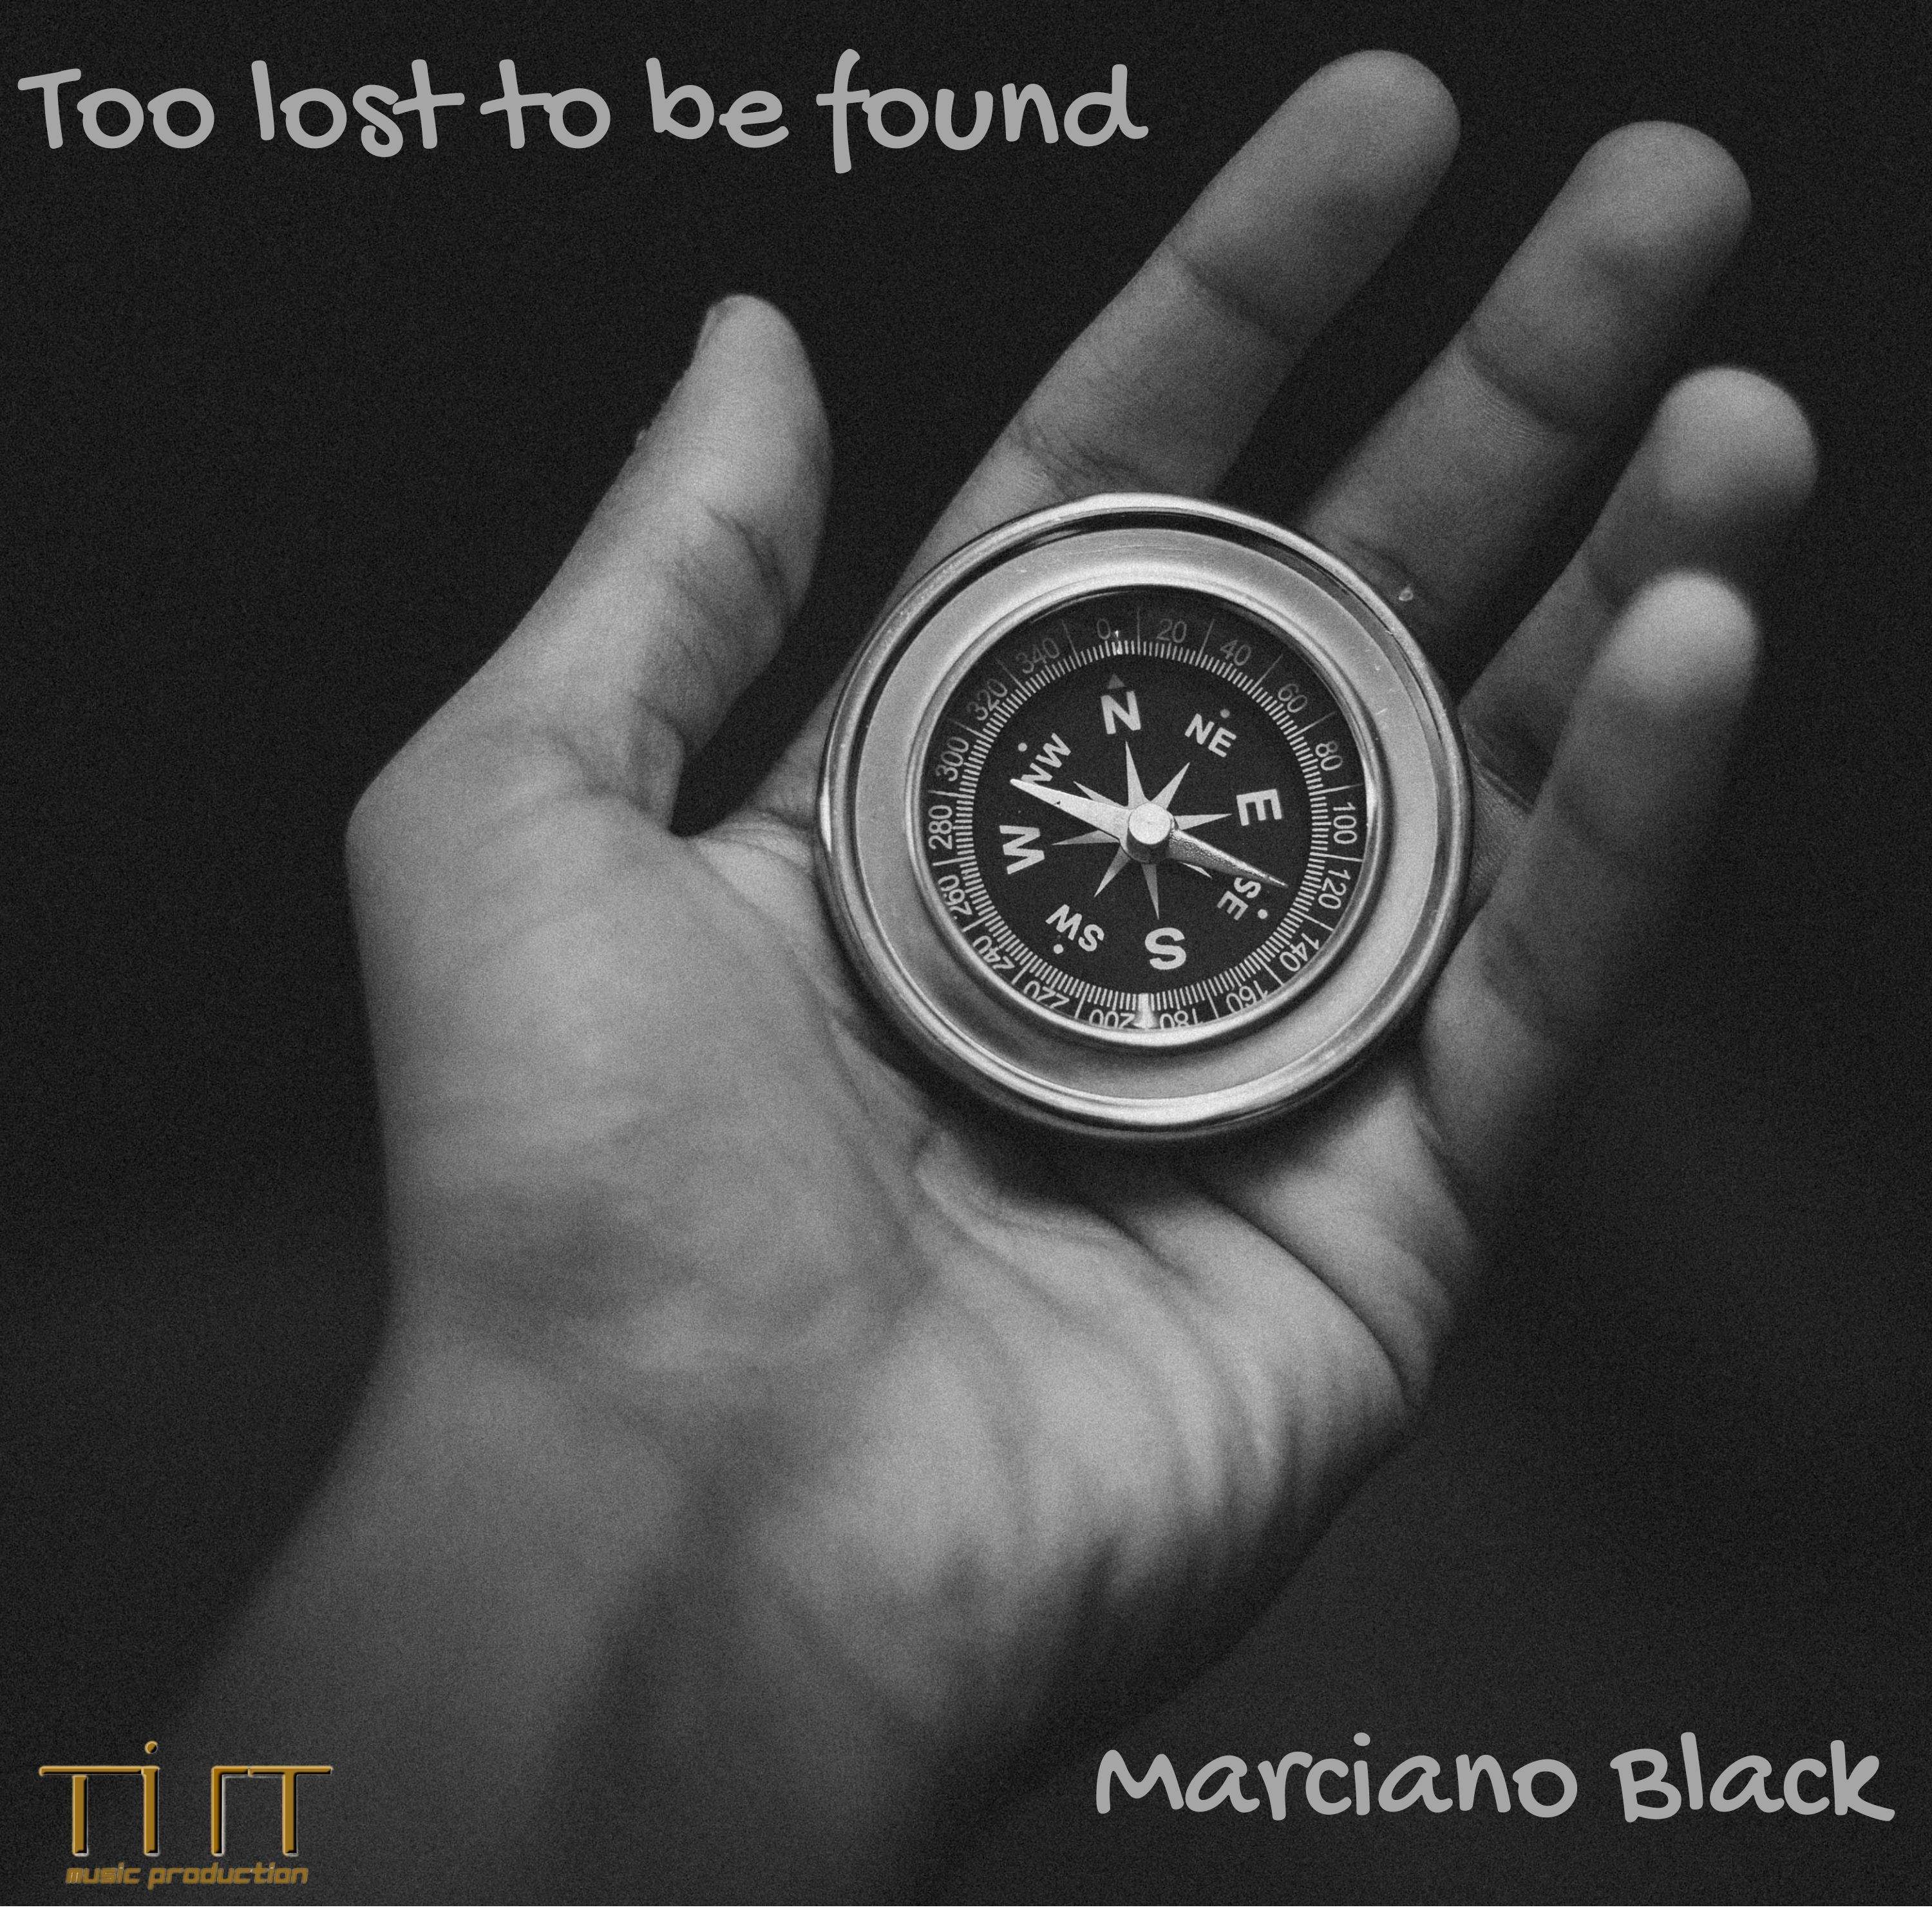 Too Lost To Be Found is the new song performed by Marciano Black!